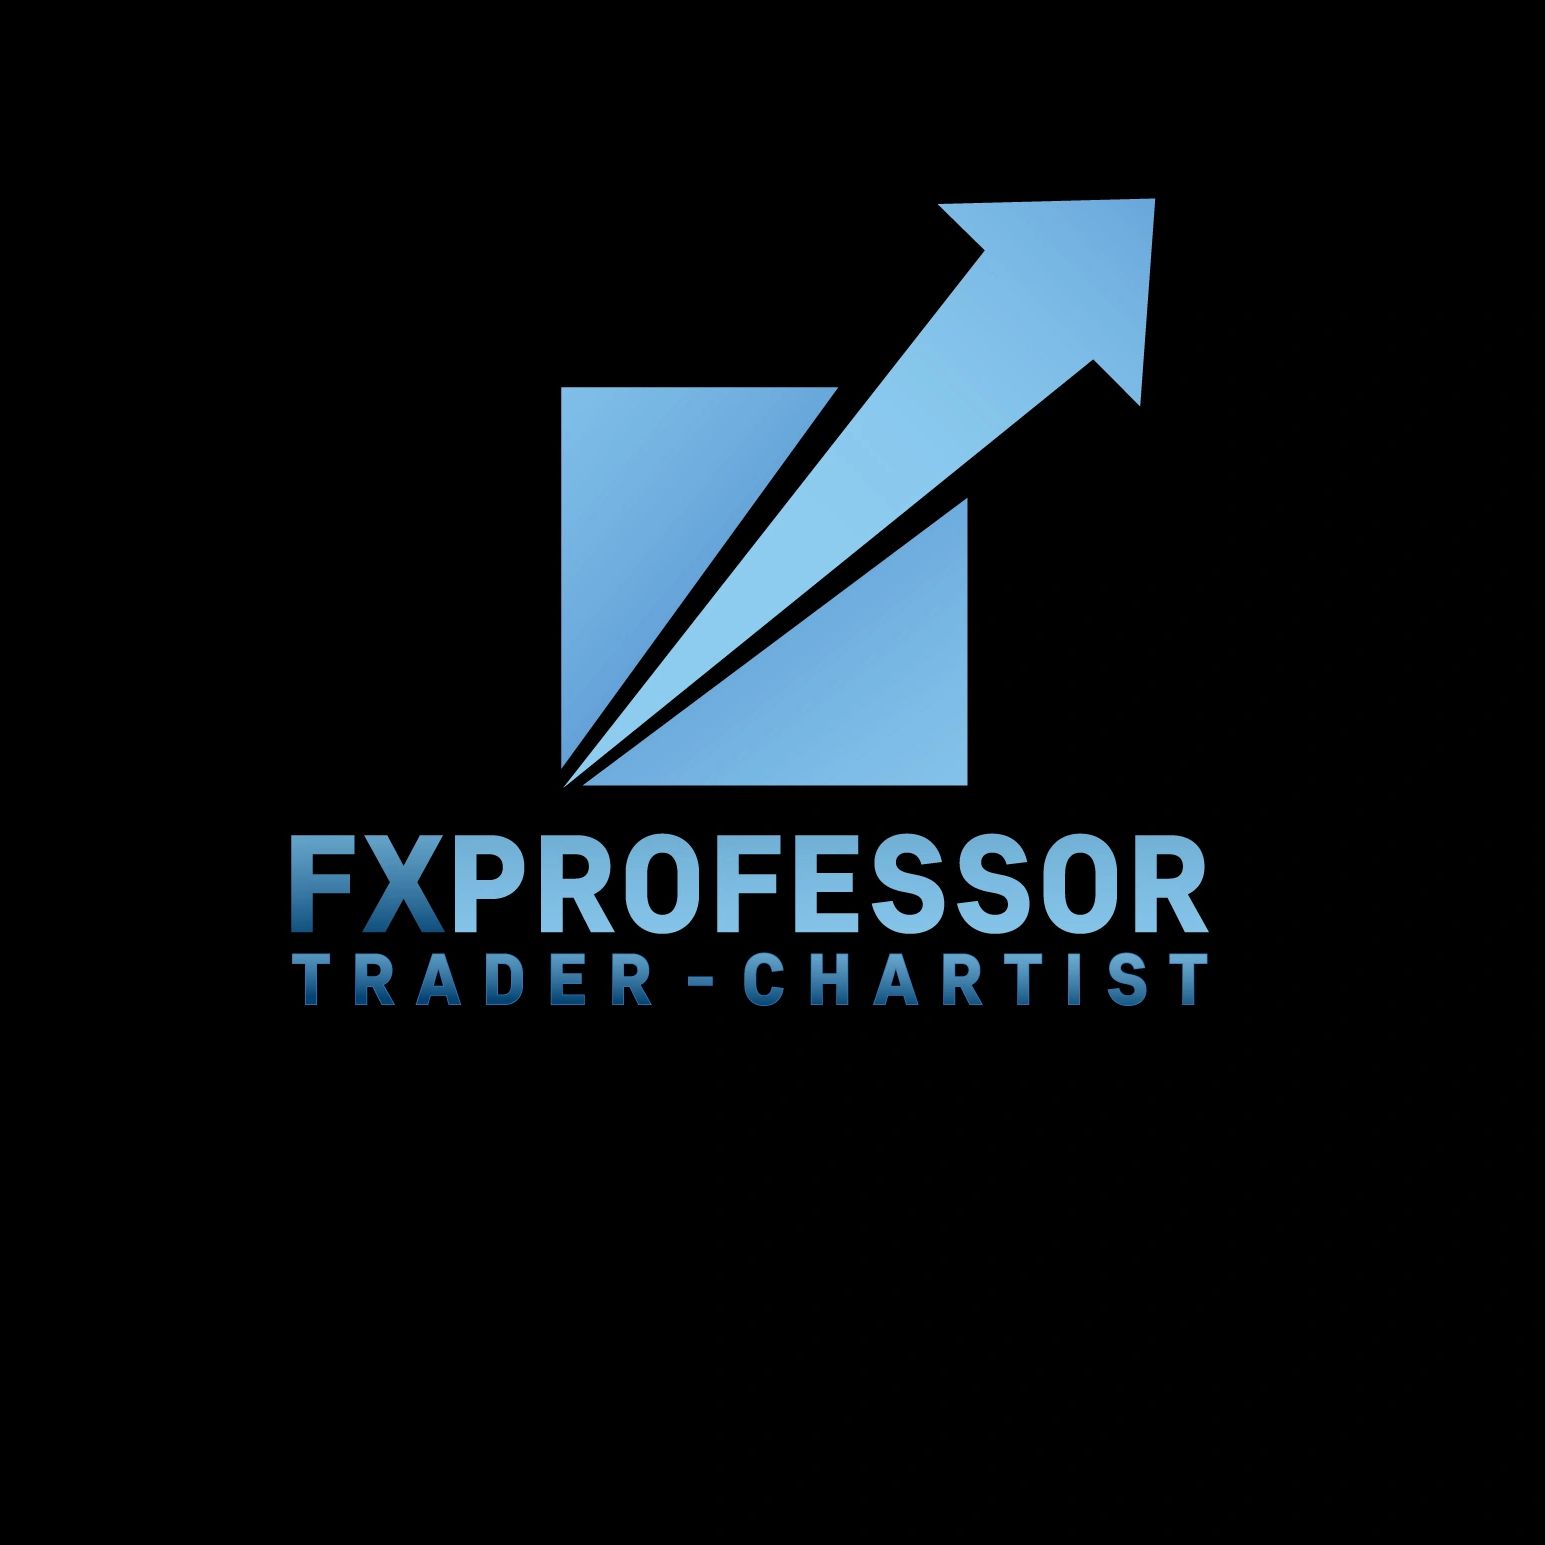 FXPROFESSOR the famous Trader offers some of the best:
Crypto signals
Forex signals